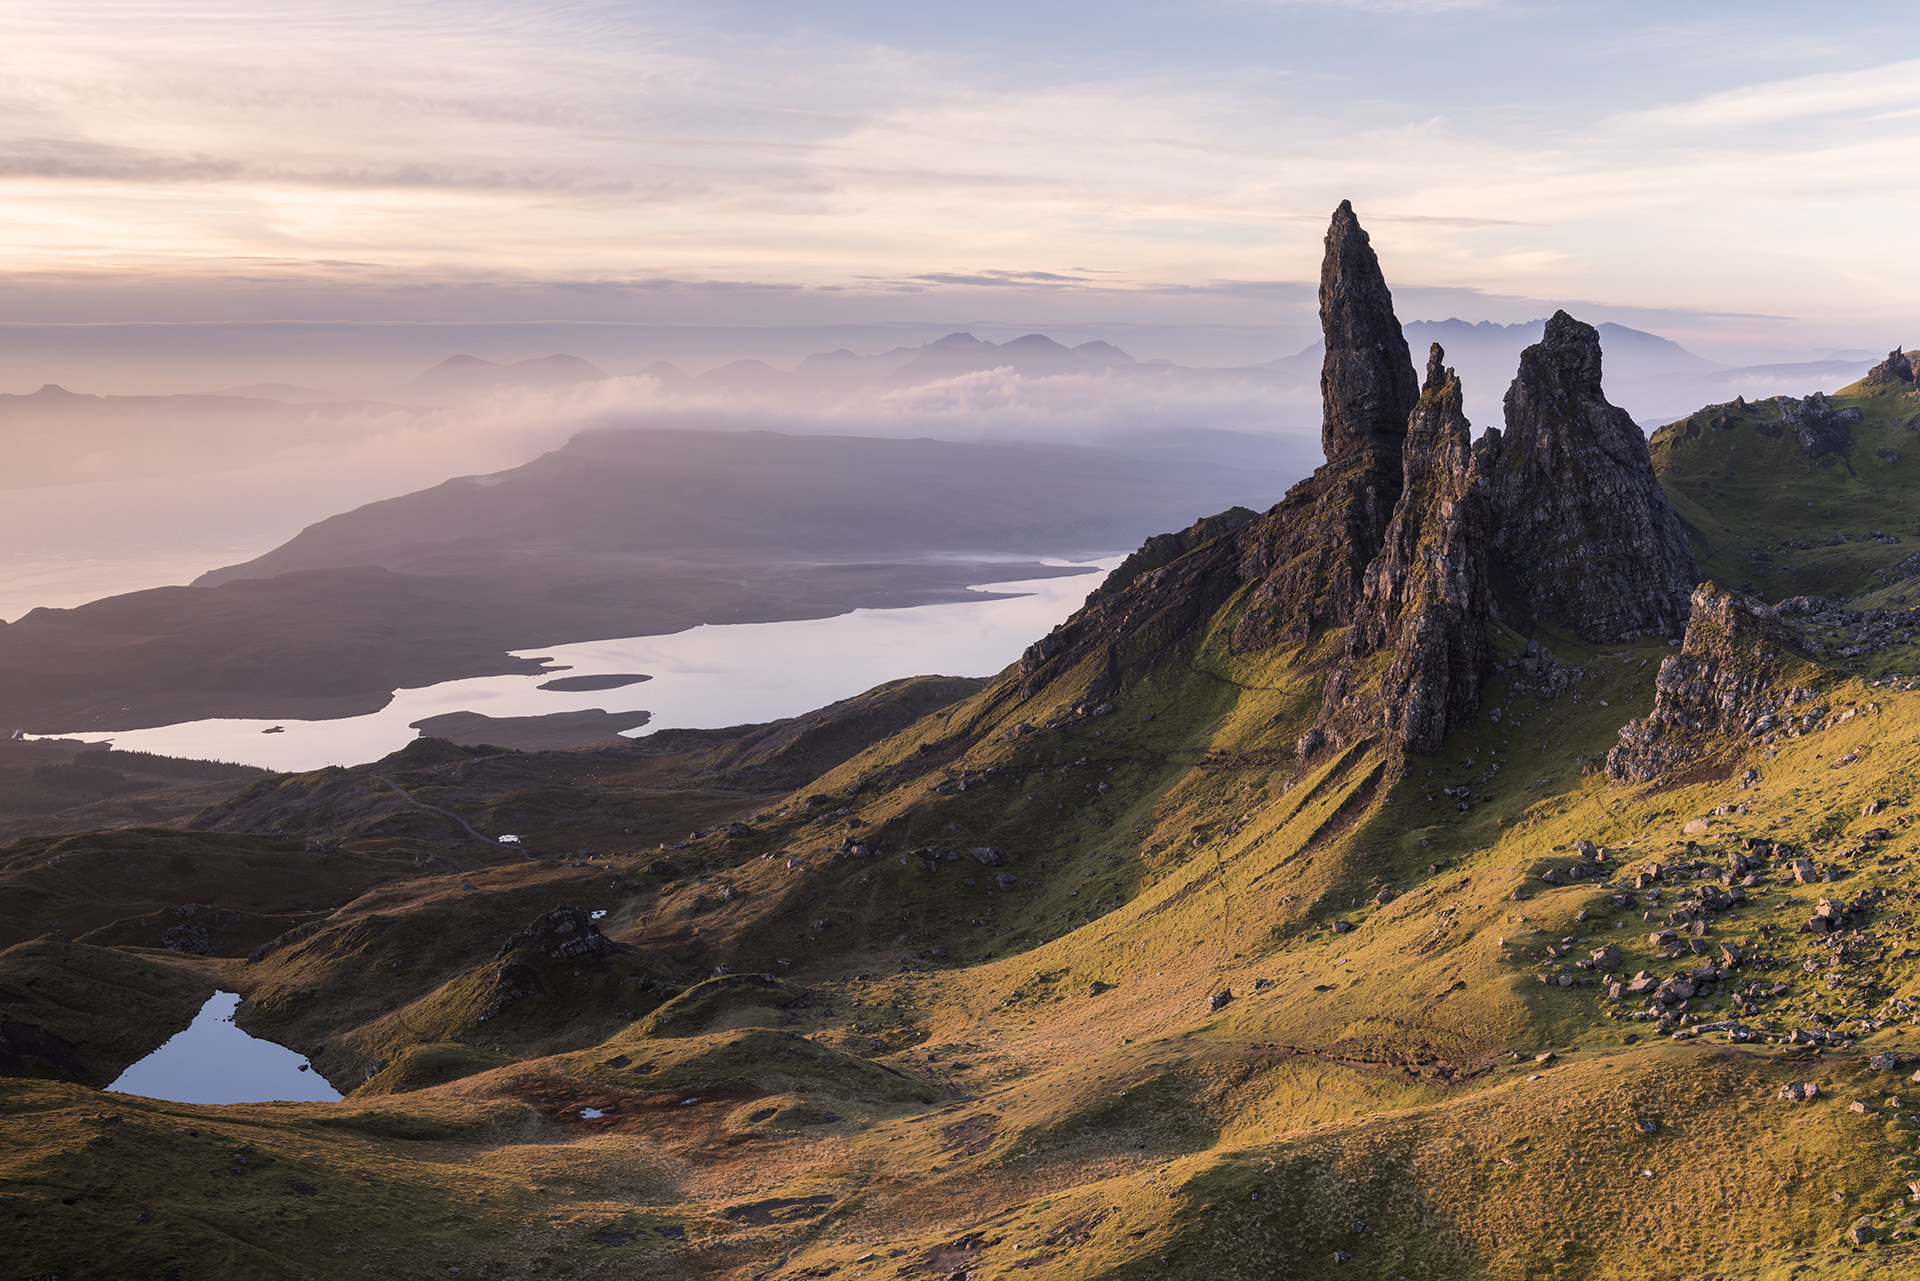 The Old Man of Storr, situated on the Trotternish peninsula of the Isle of Skye, Scotland (Getty Images)